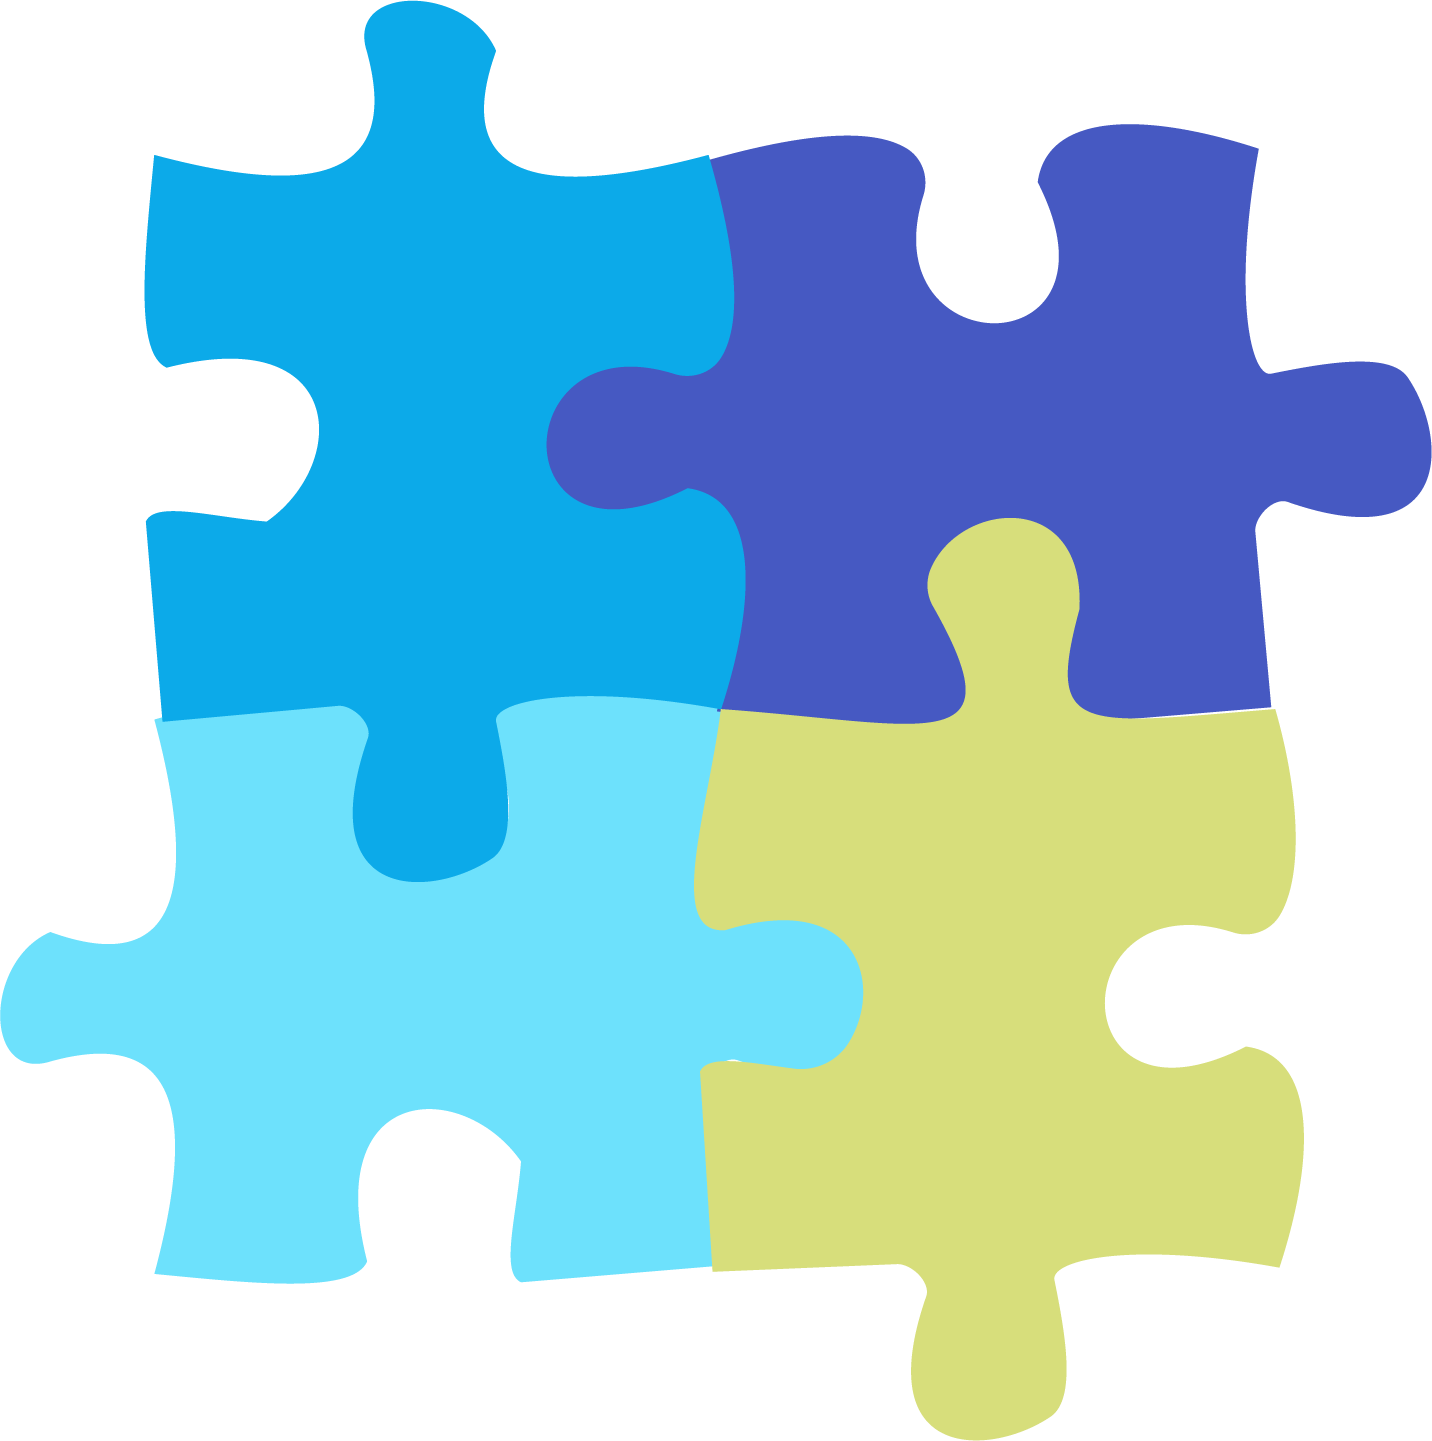 Clickup puzzlepieces taskreports . Teamwork clipart jigsaw puzzle